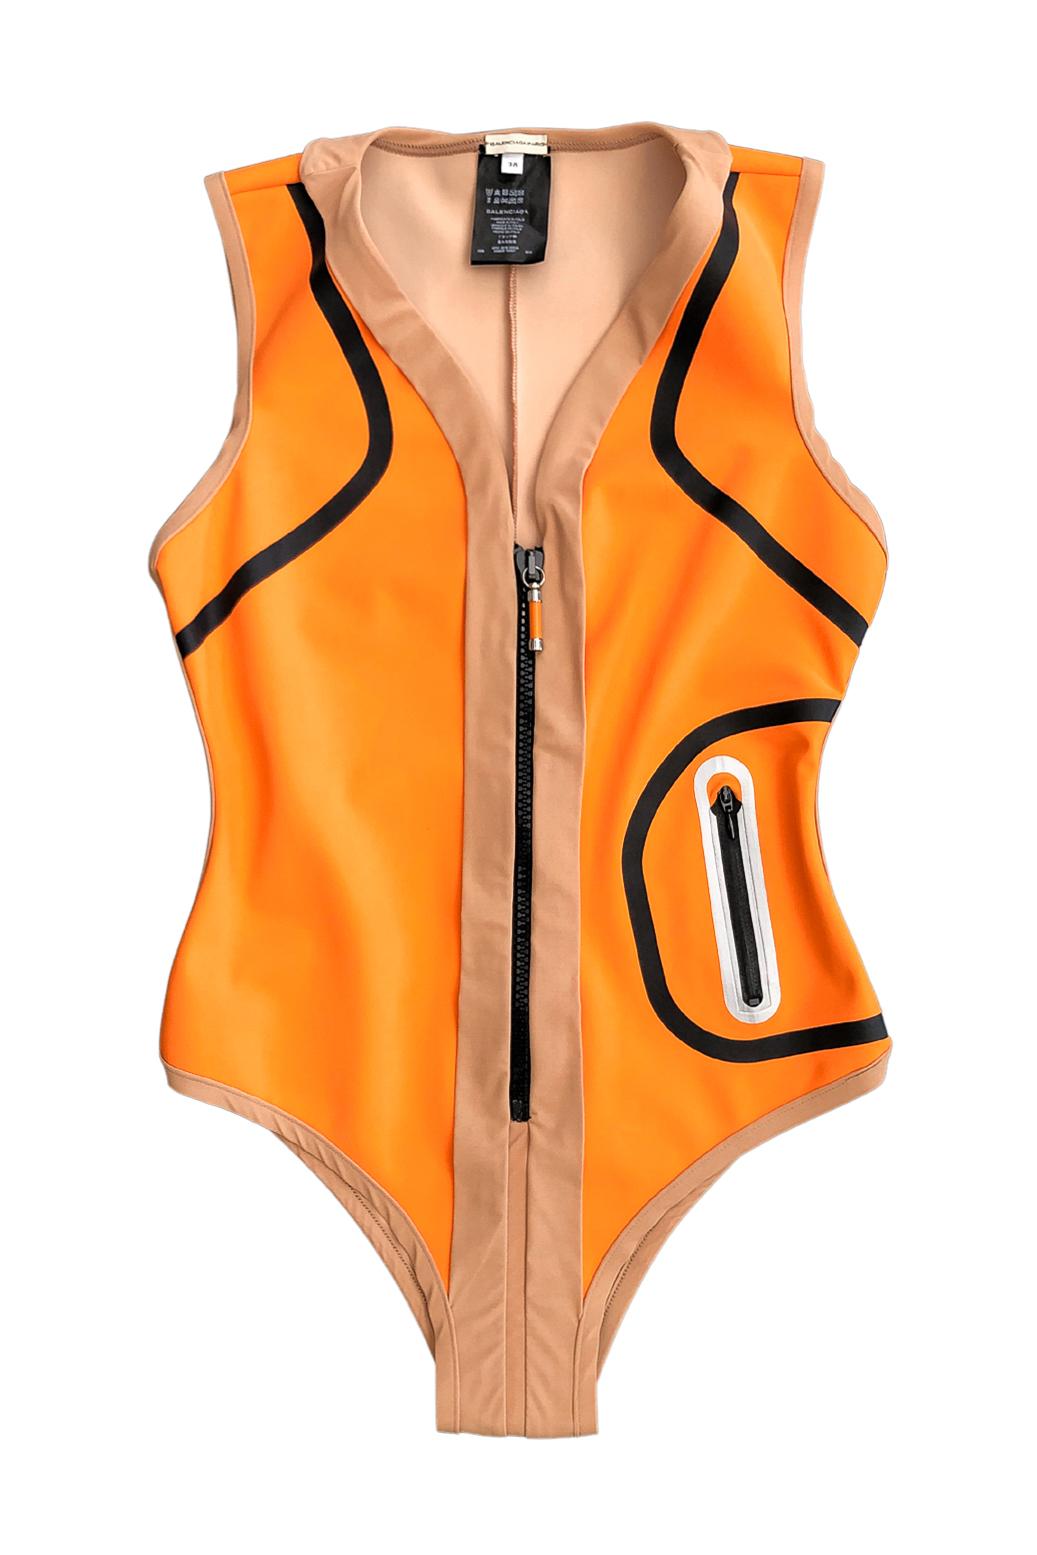 Balenciaga Orange Tech Swimsuit 2010 In Excellent Condition For Sale In Los Angeles, CA